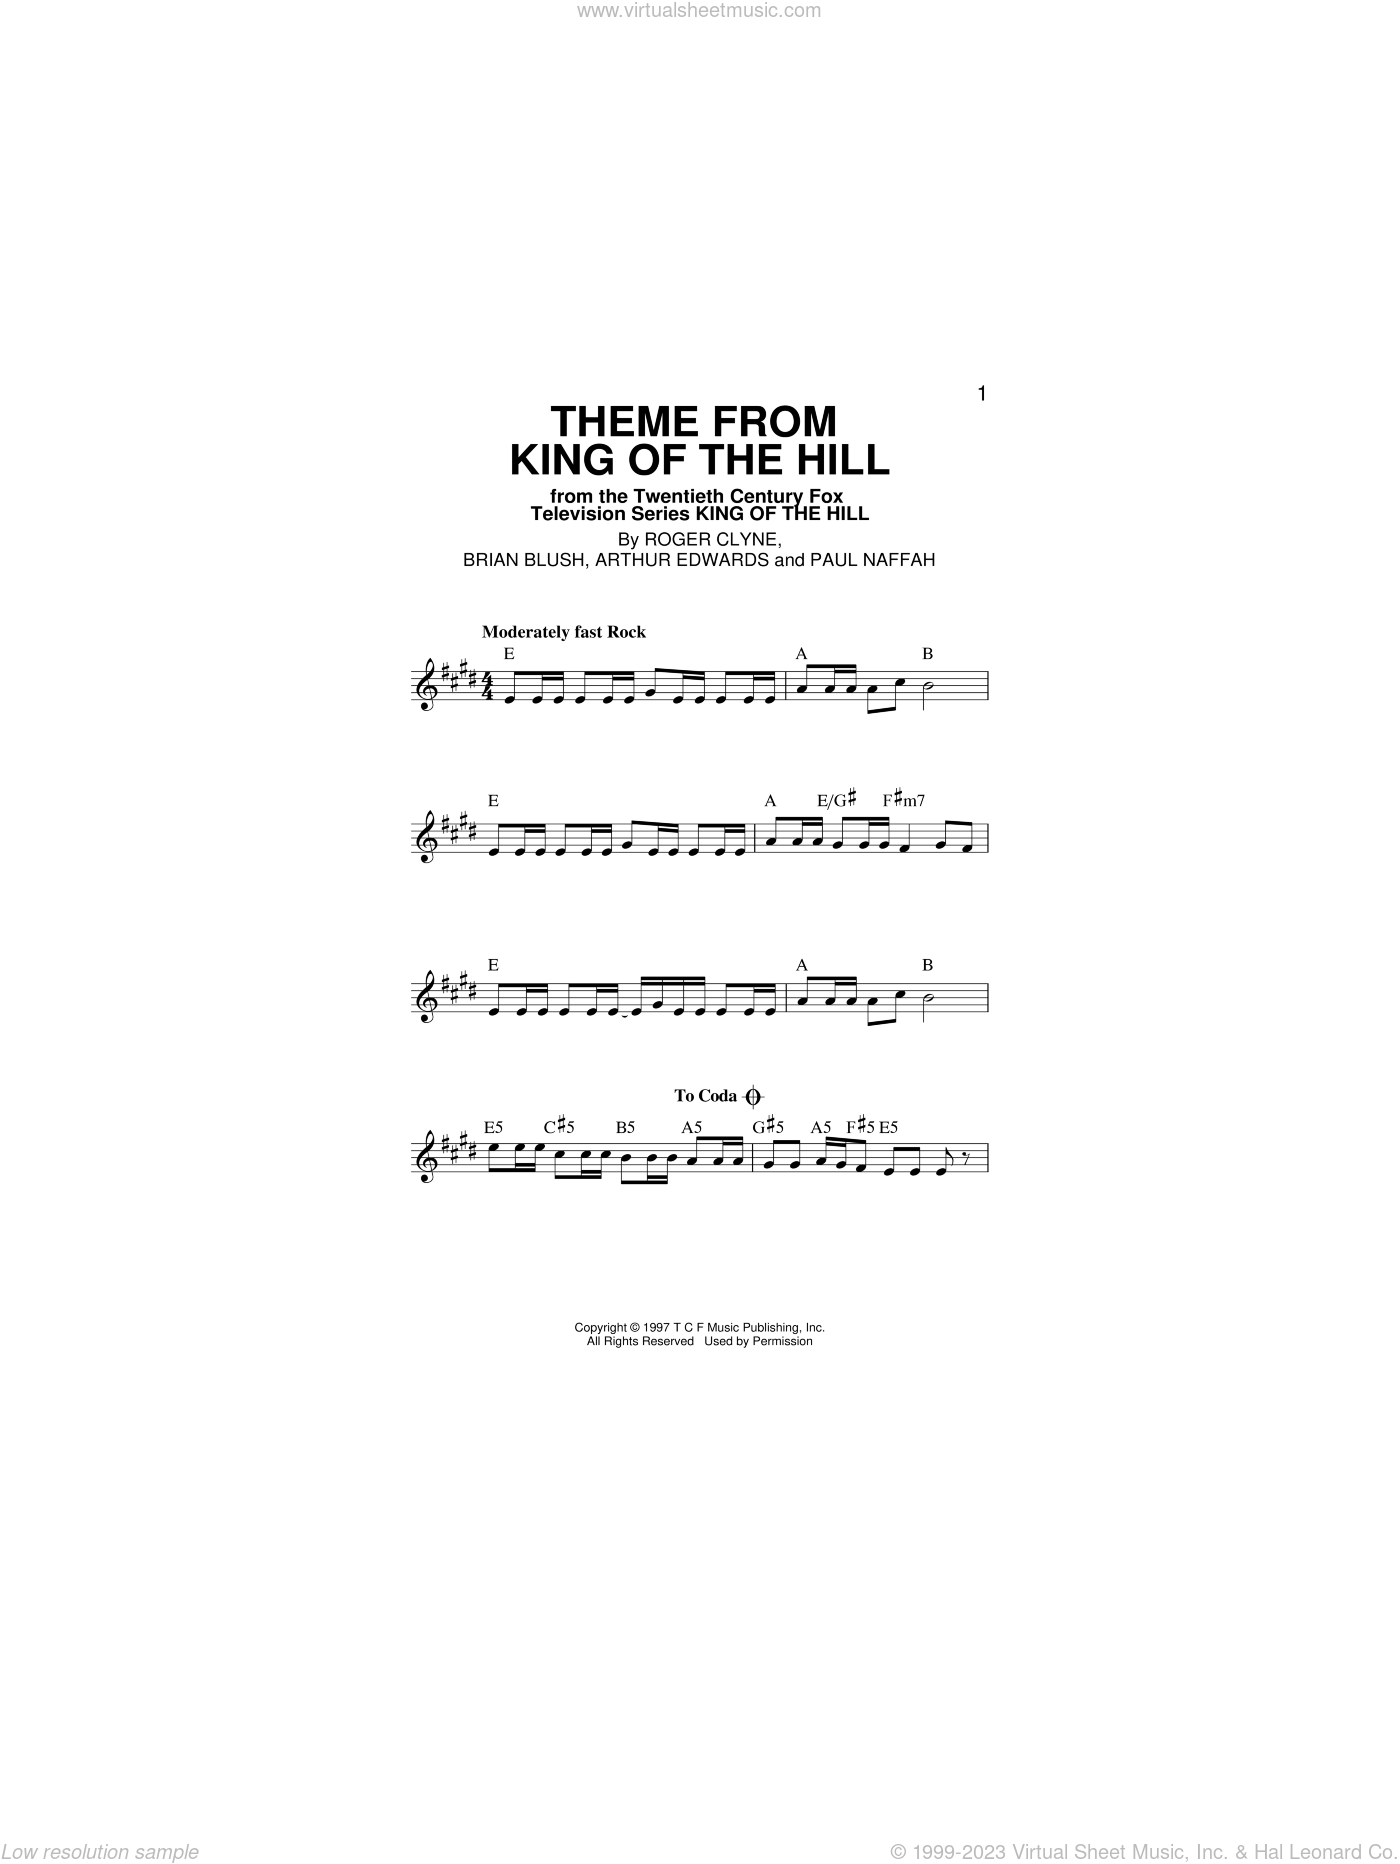 King of the Hill Theme Song - The Refreshments Sheet music for